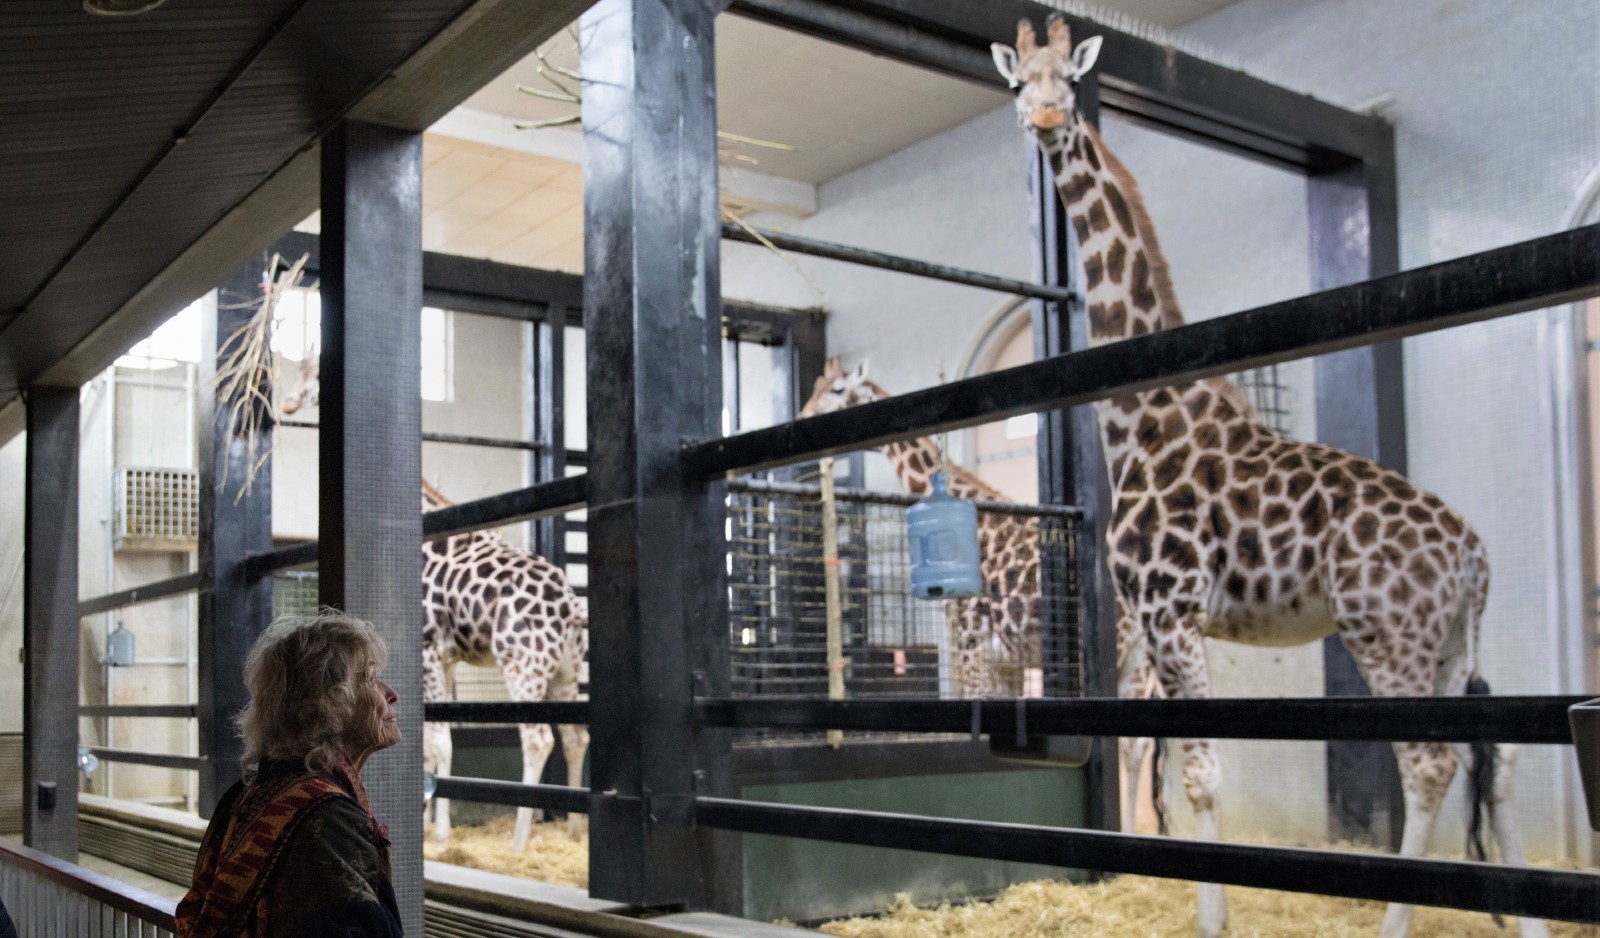 A photo of Virginia McKenna standing in a zoo's giraffe enclosure, looking up at the captive giraffe inside